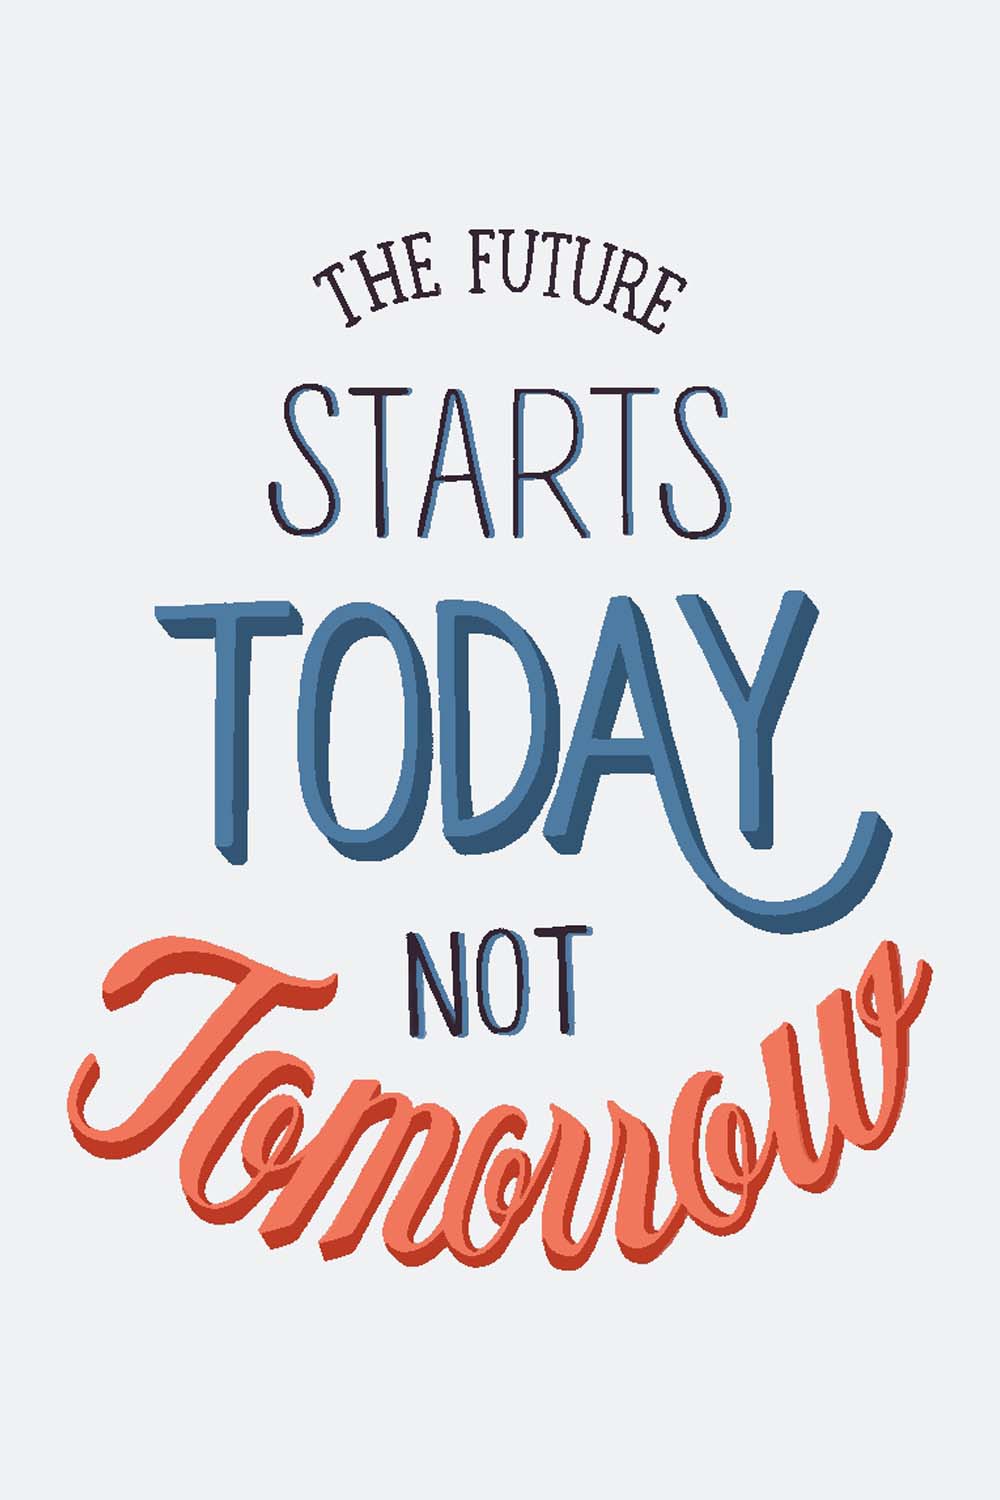 The Future Start Today Not Tomorrow  - Glass Framed Poster